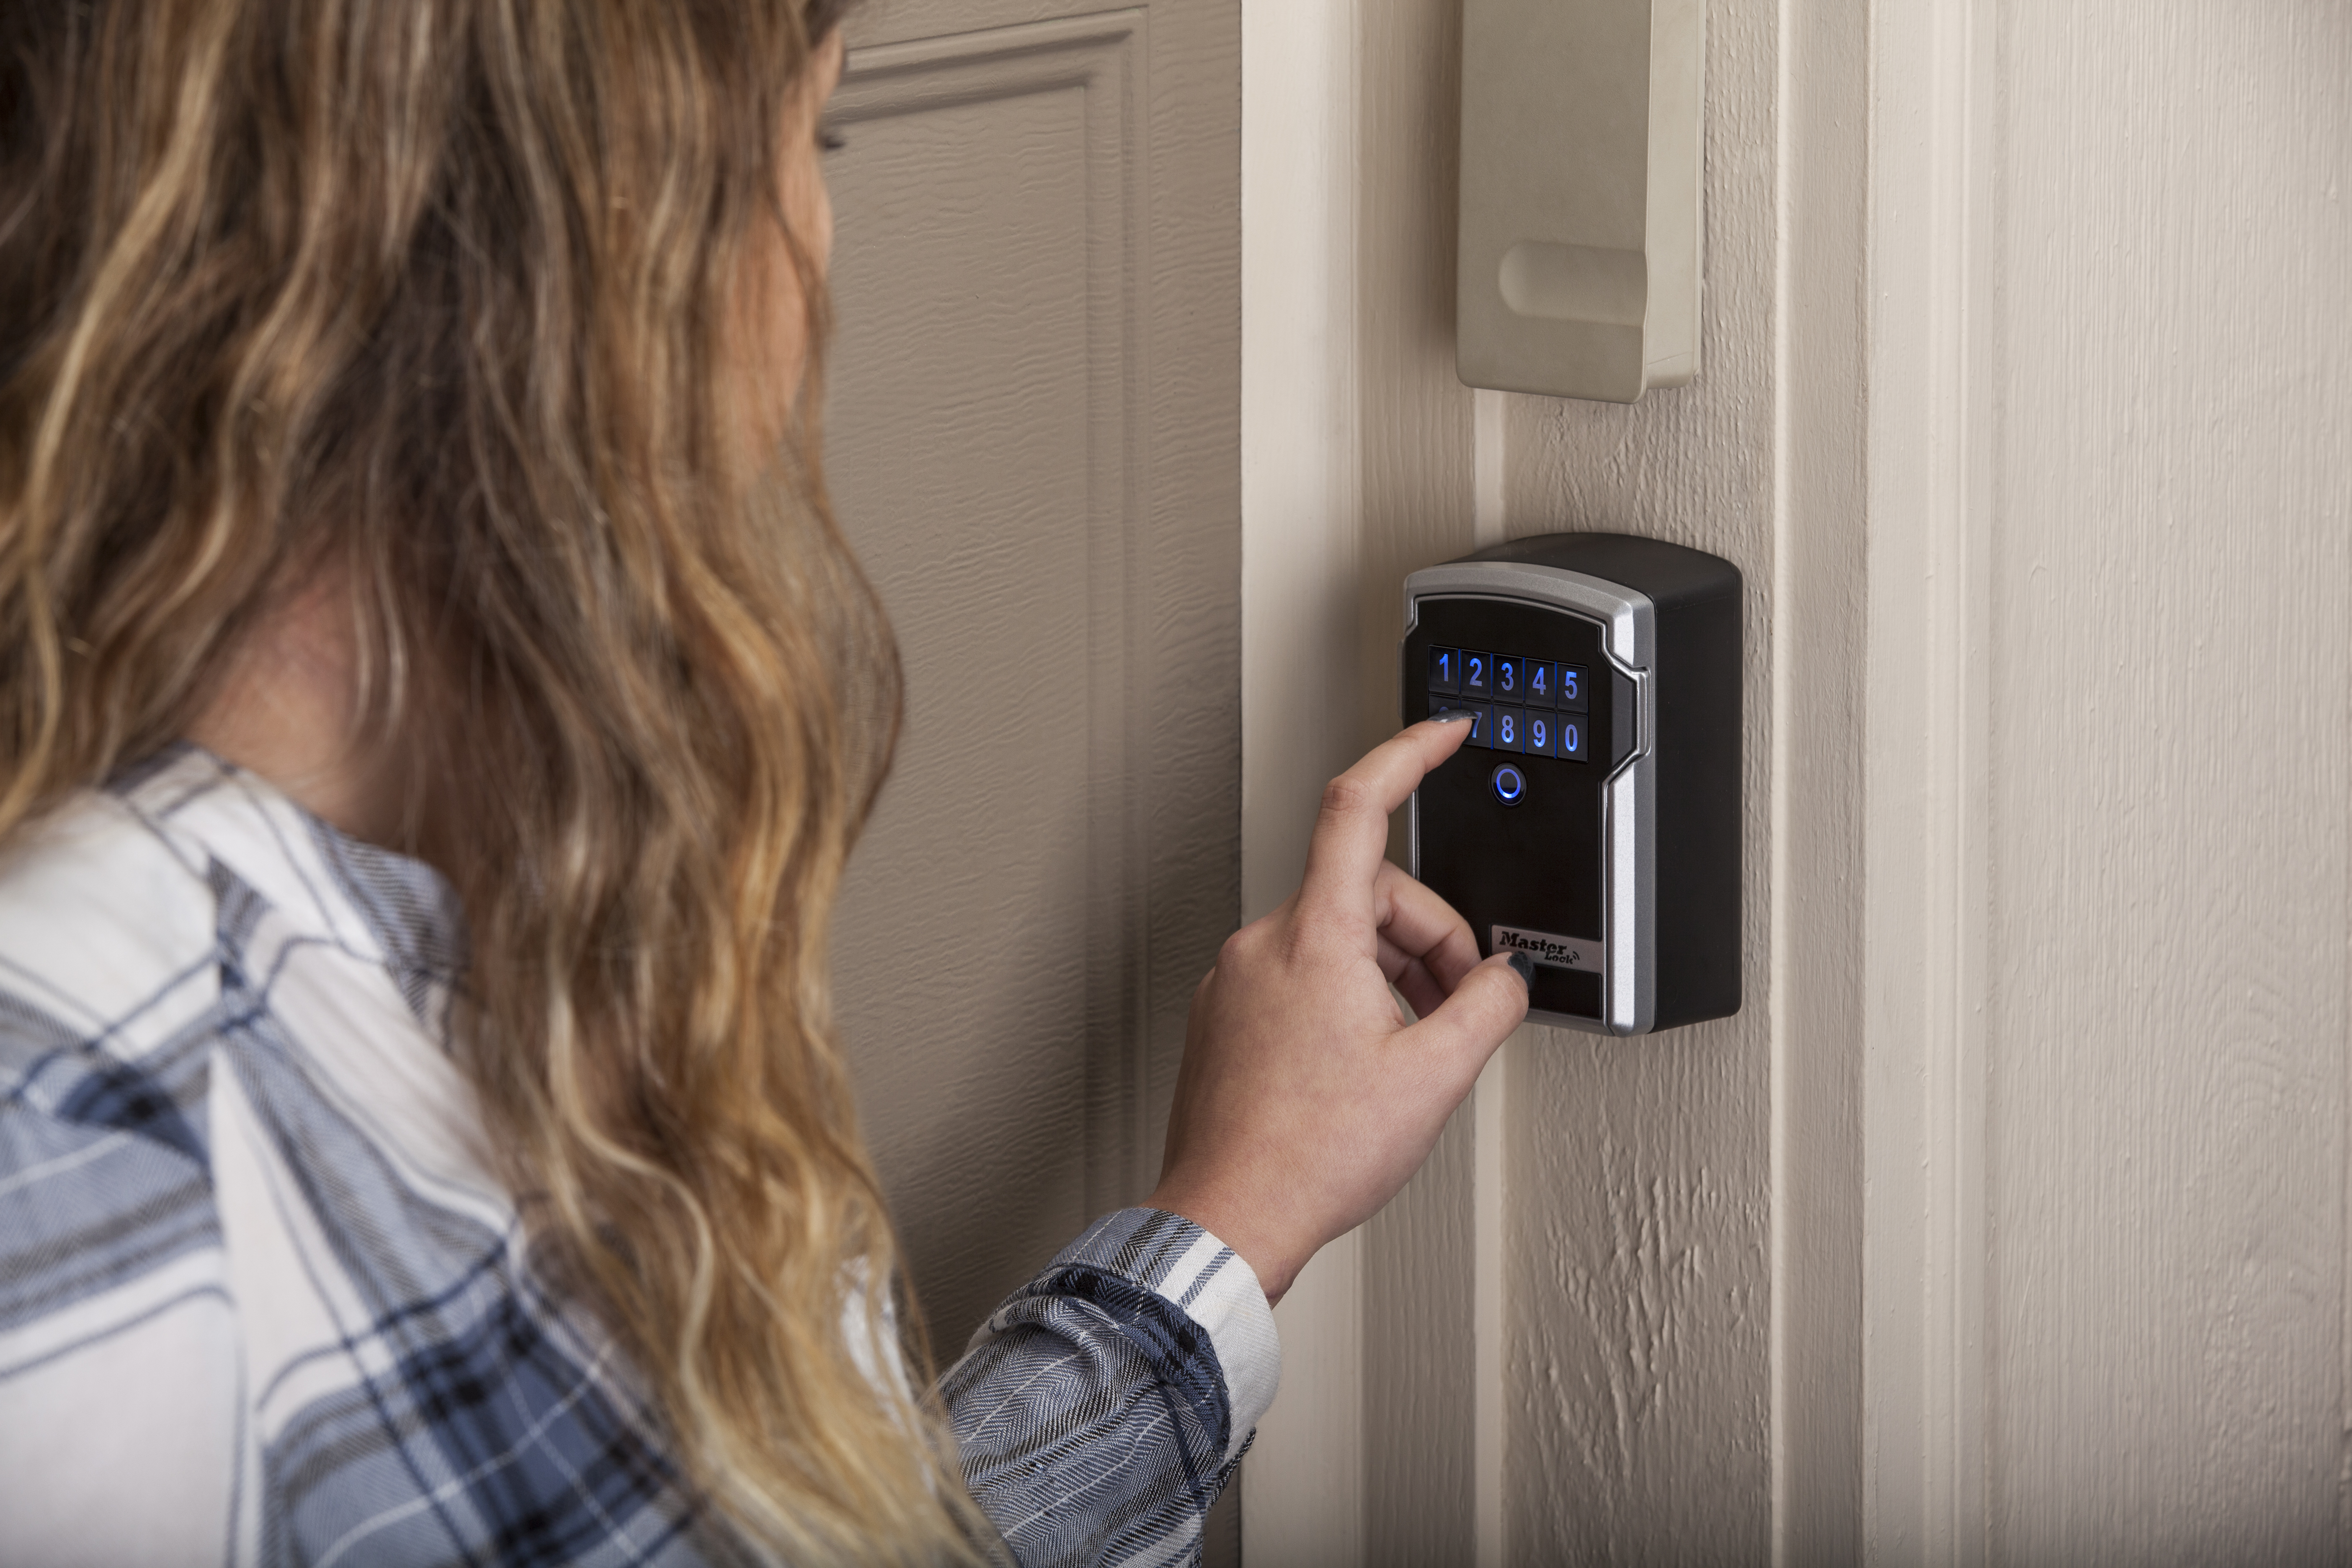 5441D Bluetooth Wall Mount Lock Box being used by a babysitter